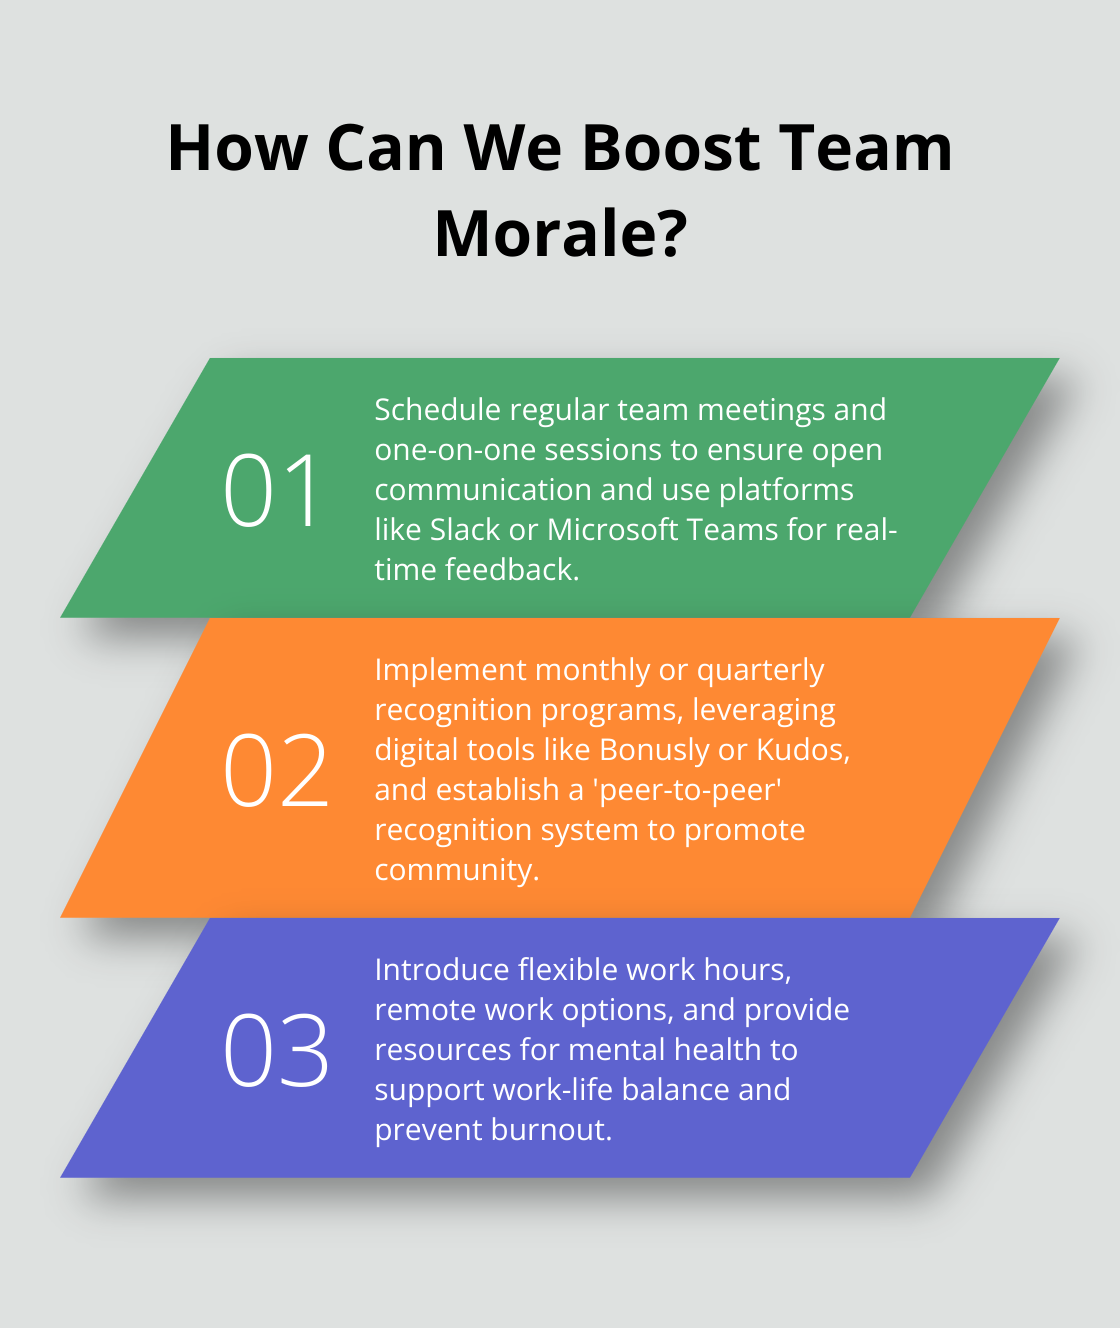 Fact - How Can We Boost Team Morale?